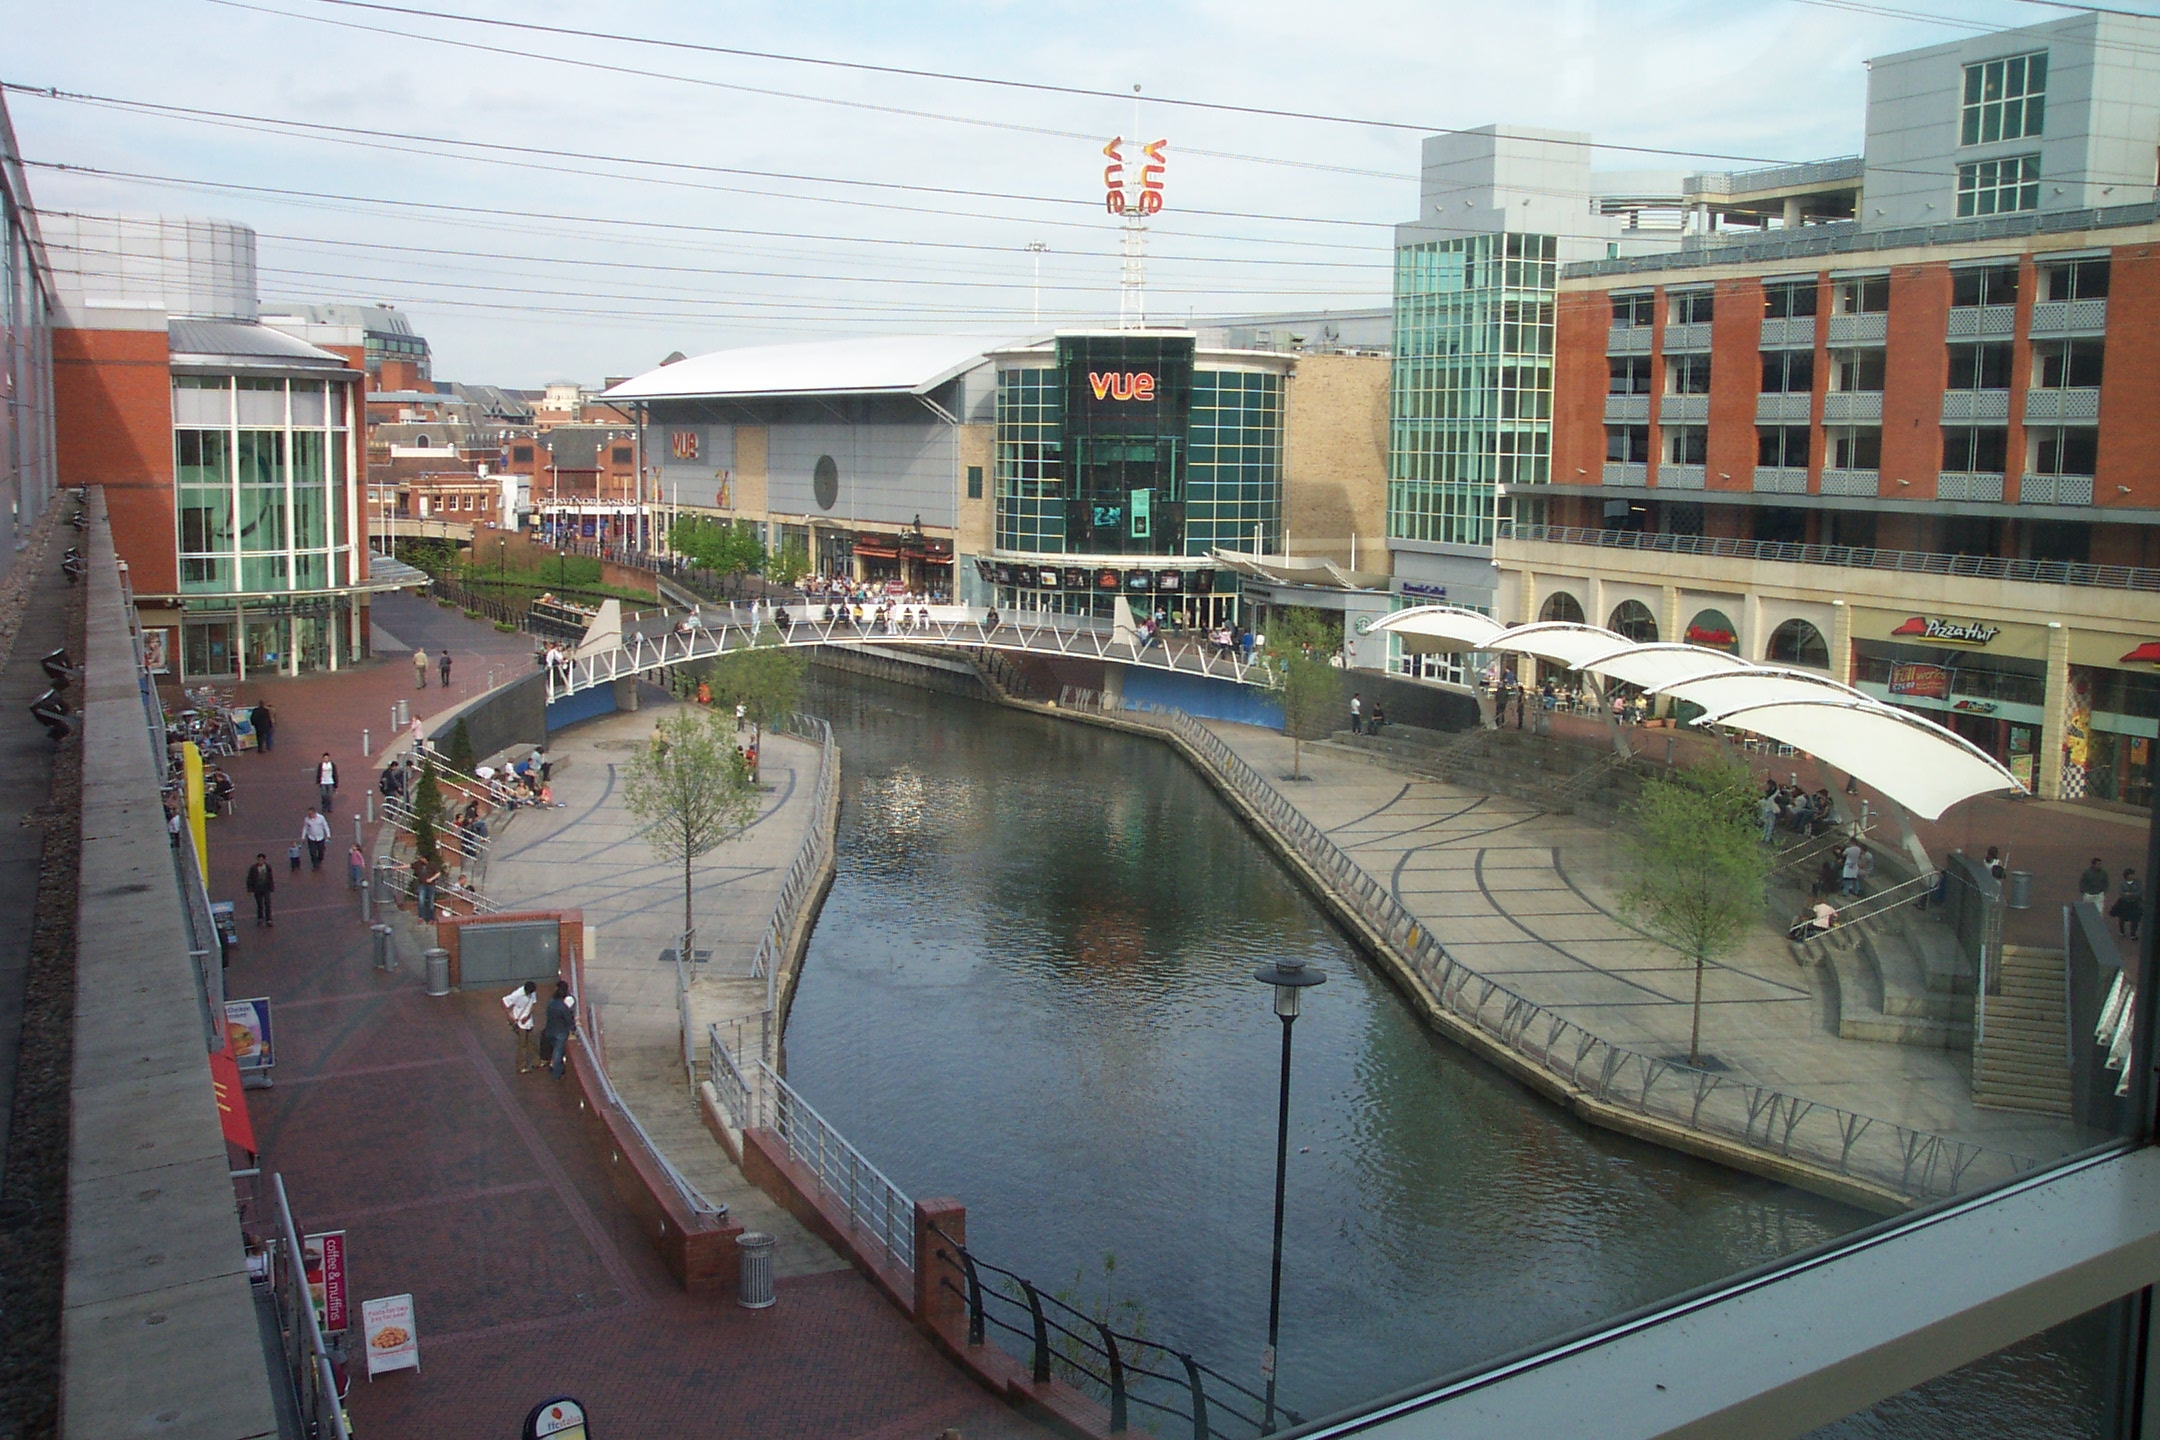 The Oracle Reading Berkshire